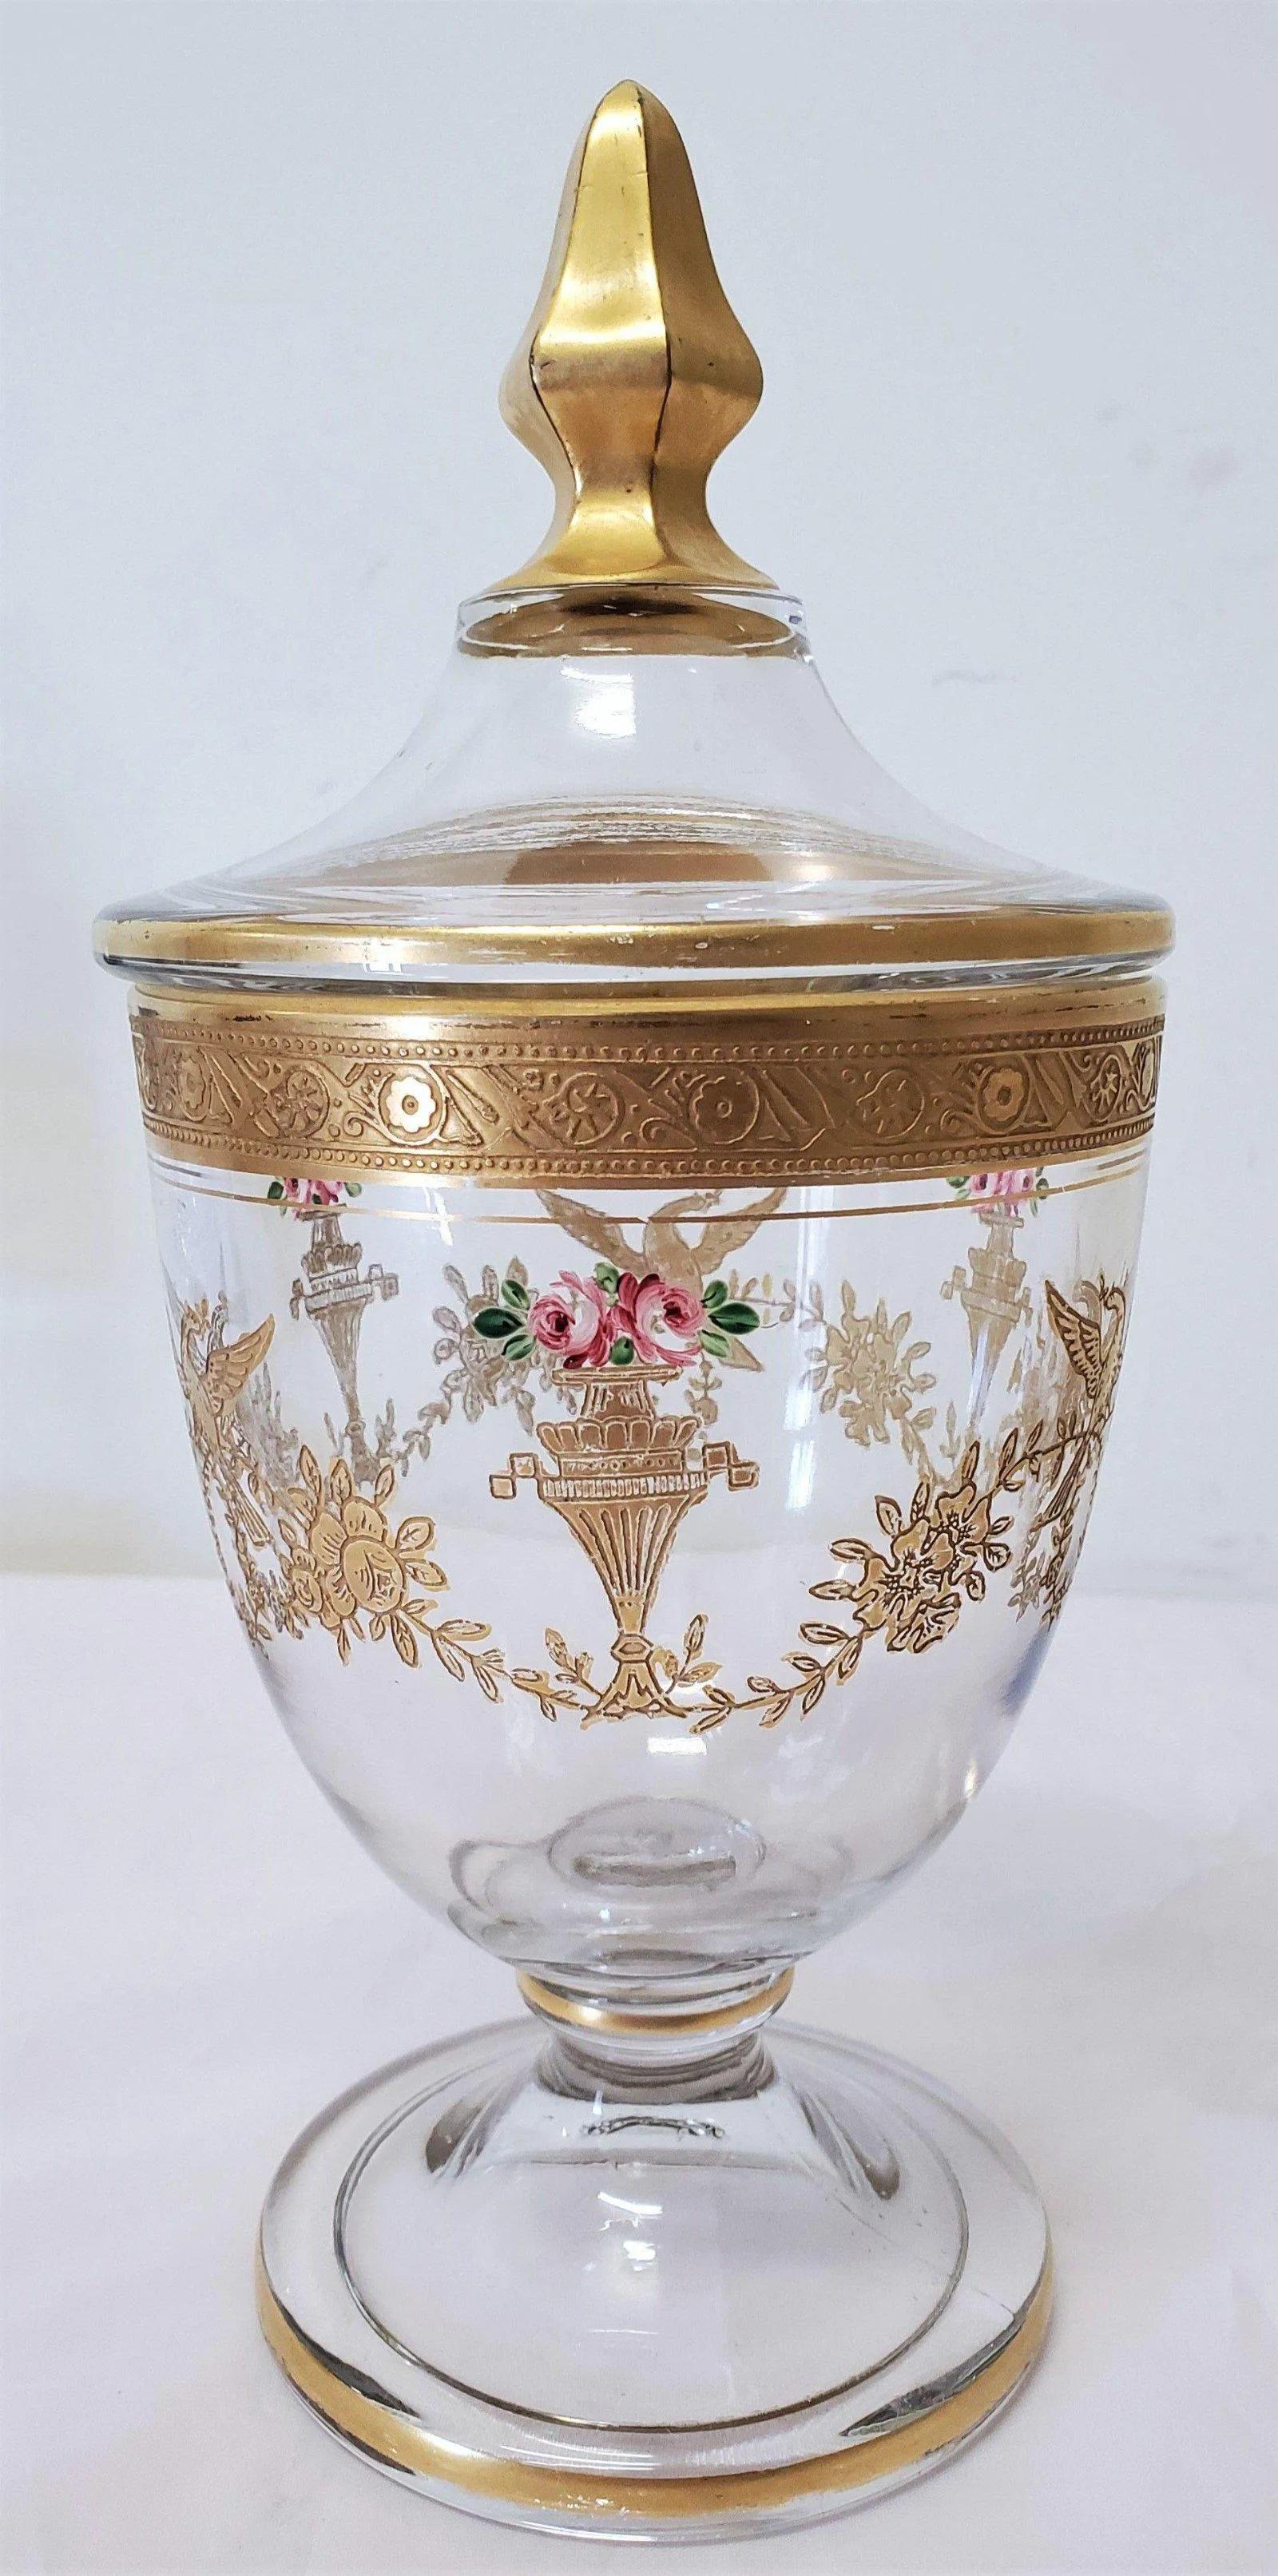 French 40s Gilt Crystal Candy Dish With Lid marked on the inner cup. This Candy Dish has bird motif ad gilt around the trim of the dish/cup.